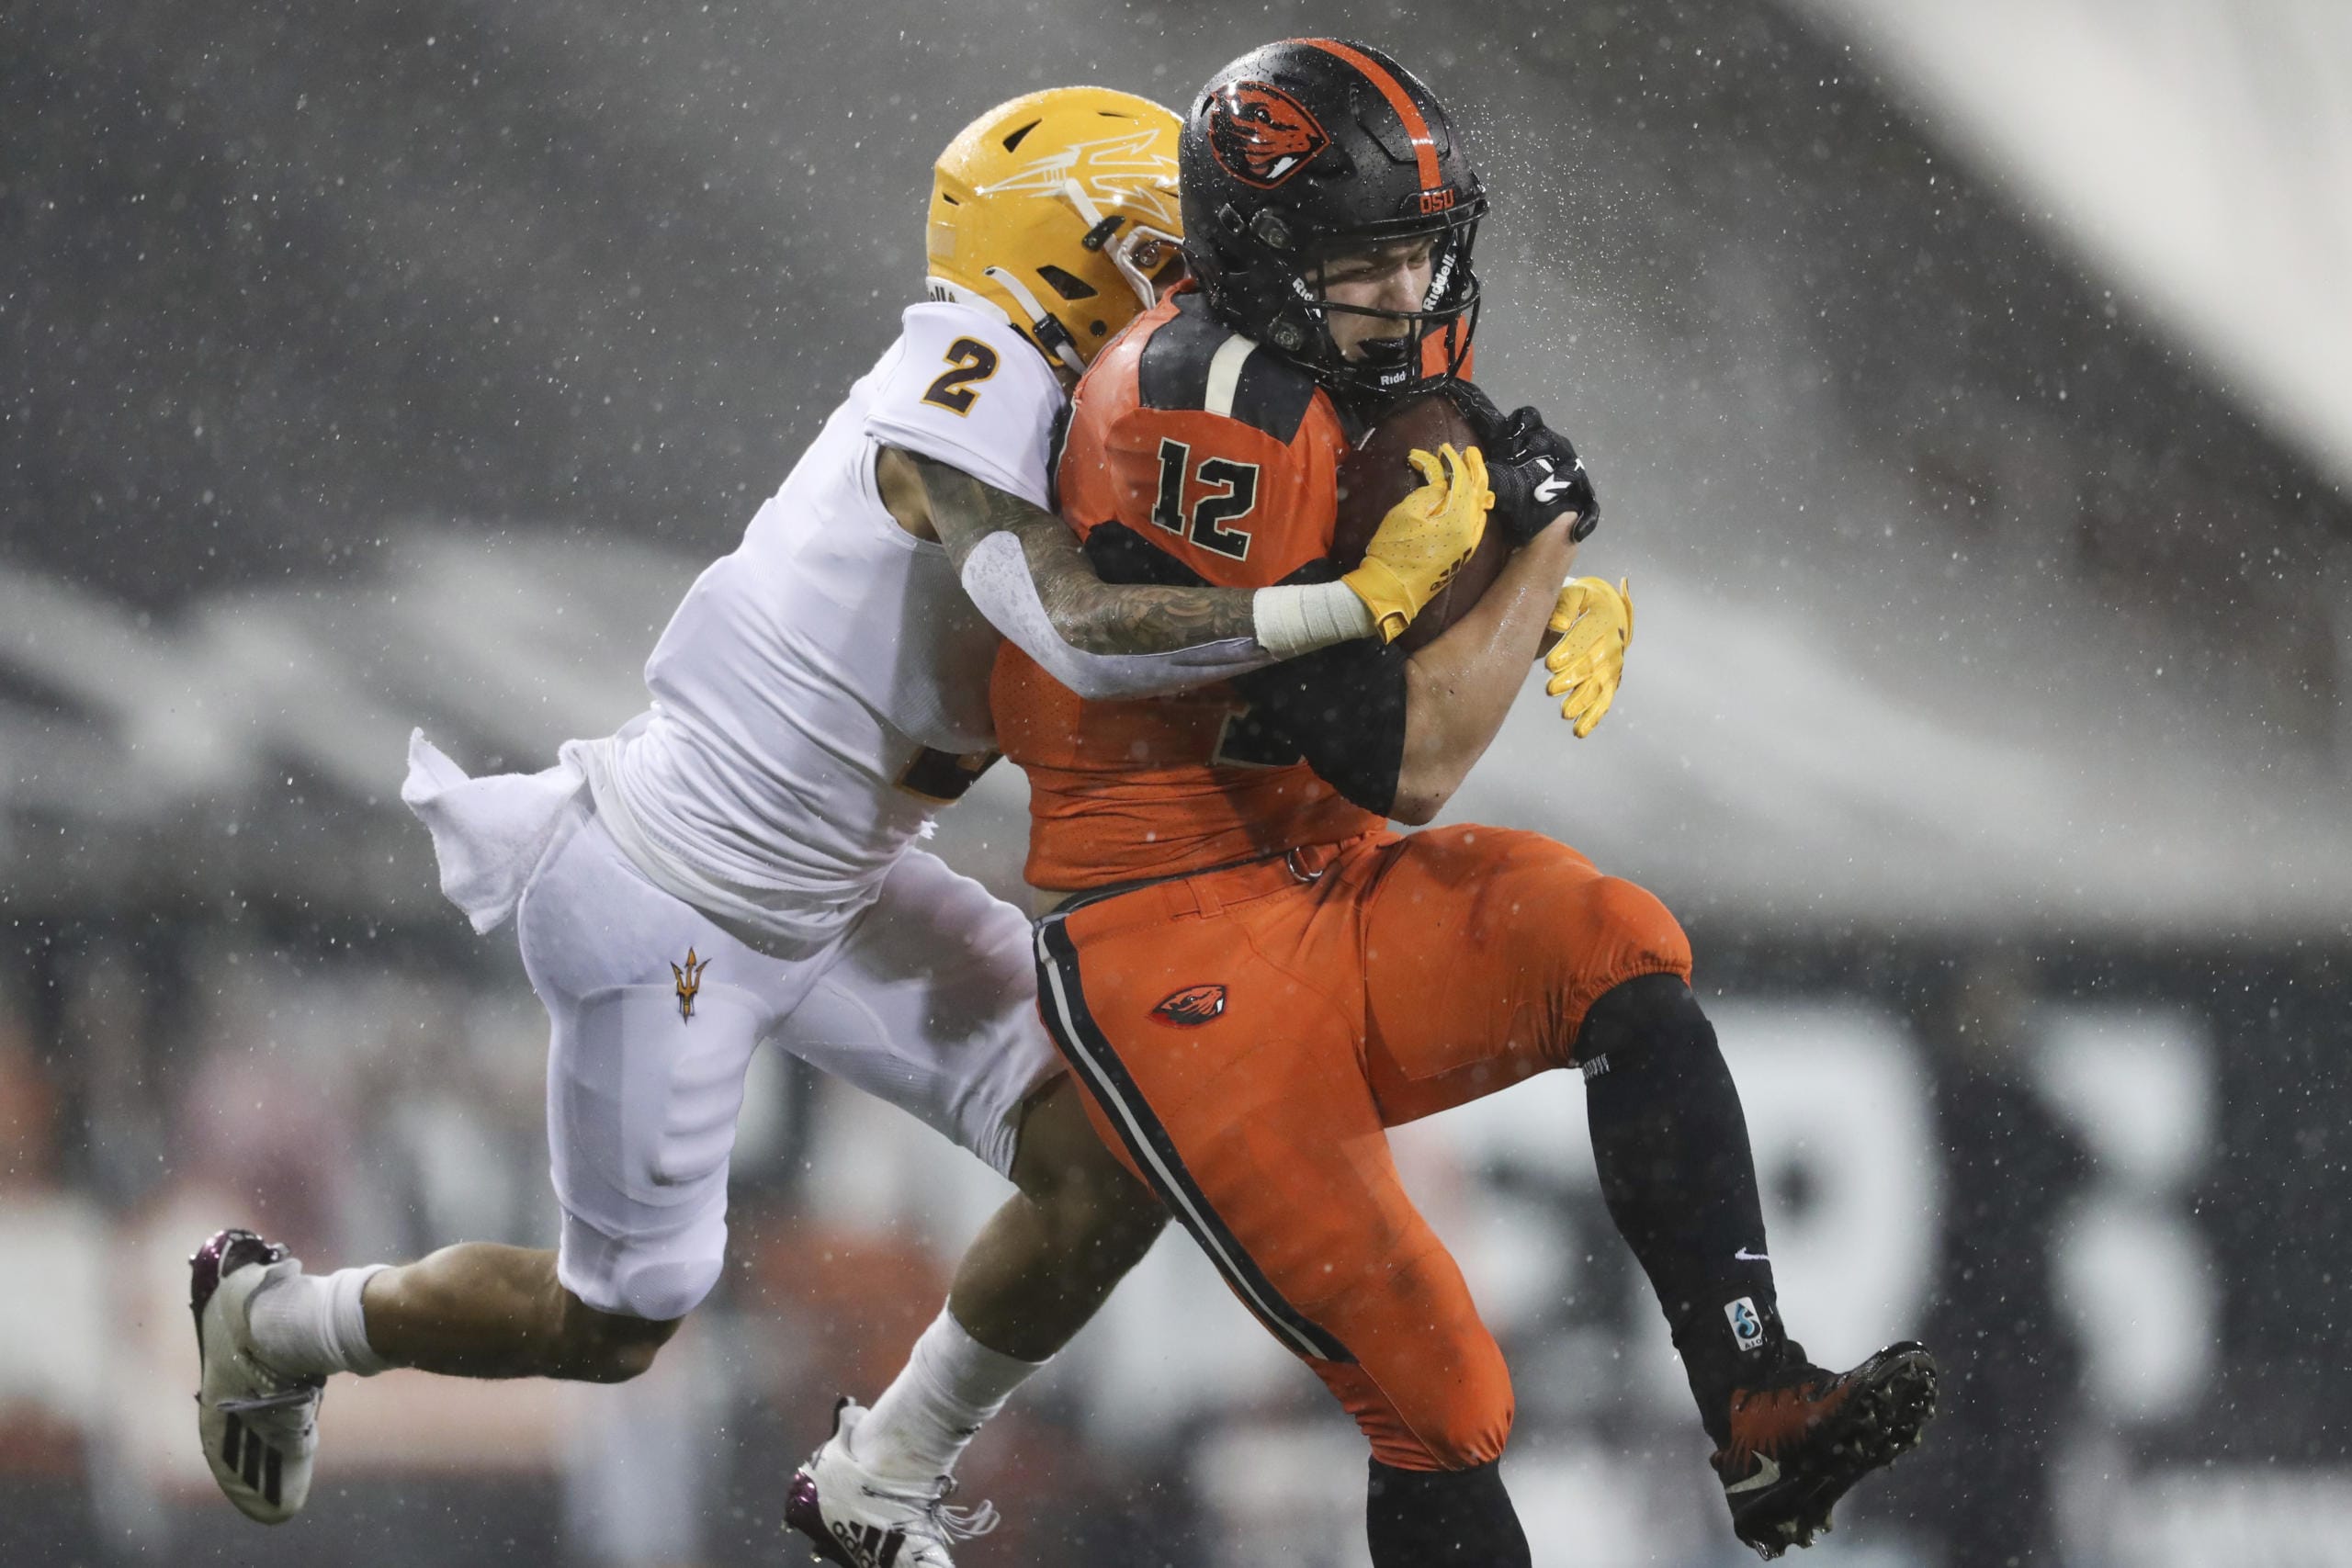 Oregon State inside linebacker Jack Colletto (12), a Camas High grad, is brought down by Arizona State defensive back DeAndre Pierce (2) during the first half of an NCAA college football game in Corvallis, Ore., Saturday, Dec. 19, 2020.